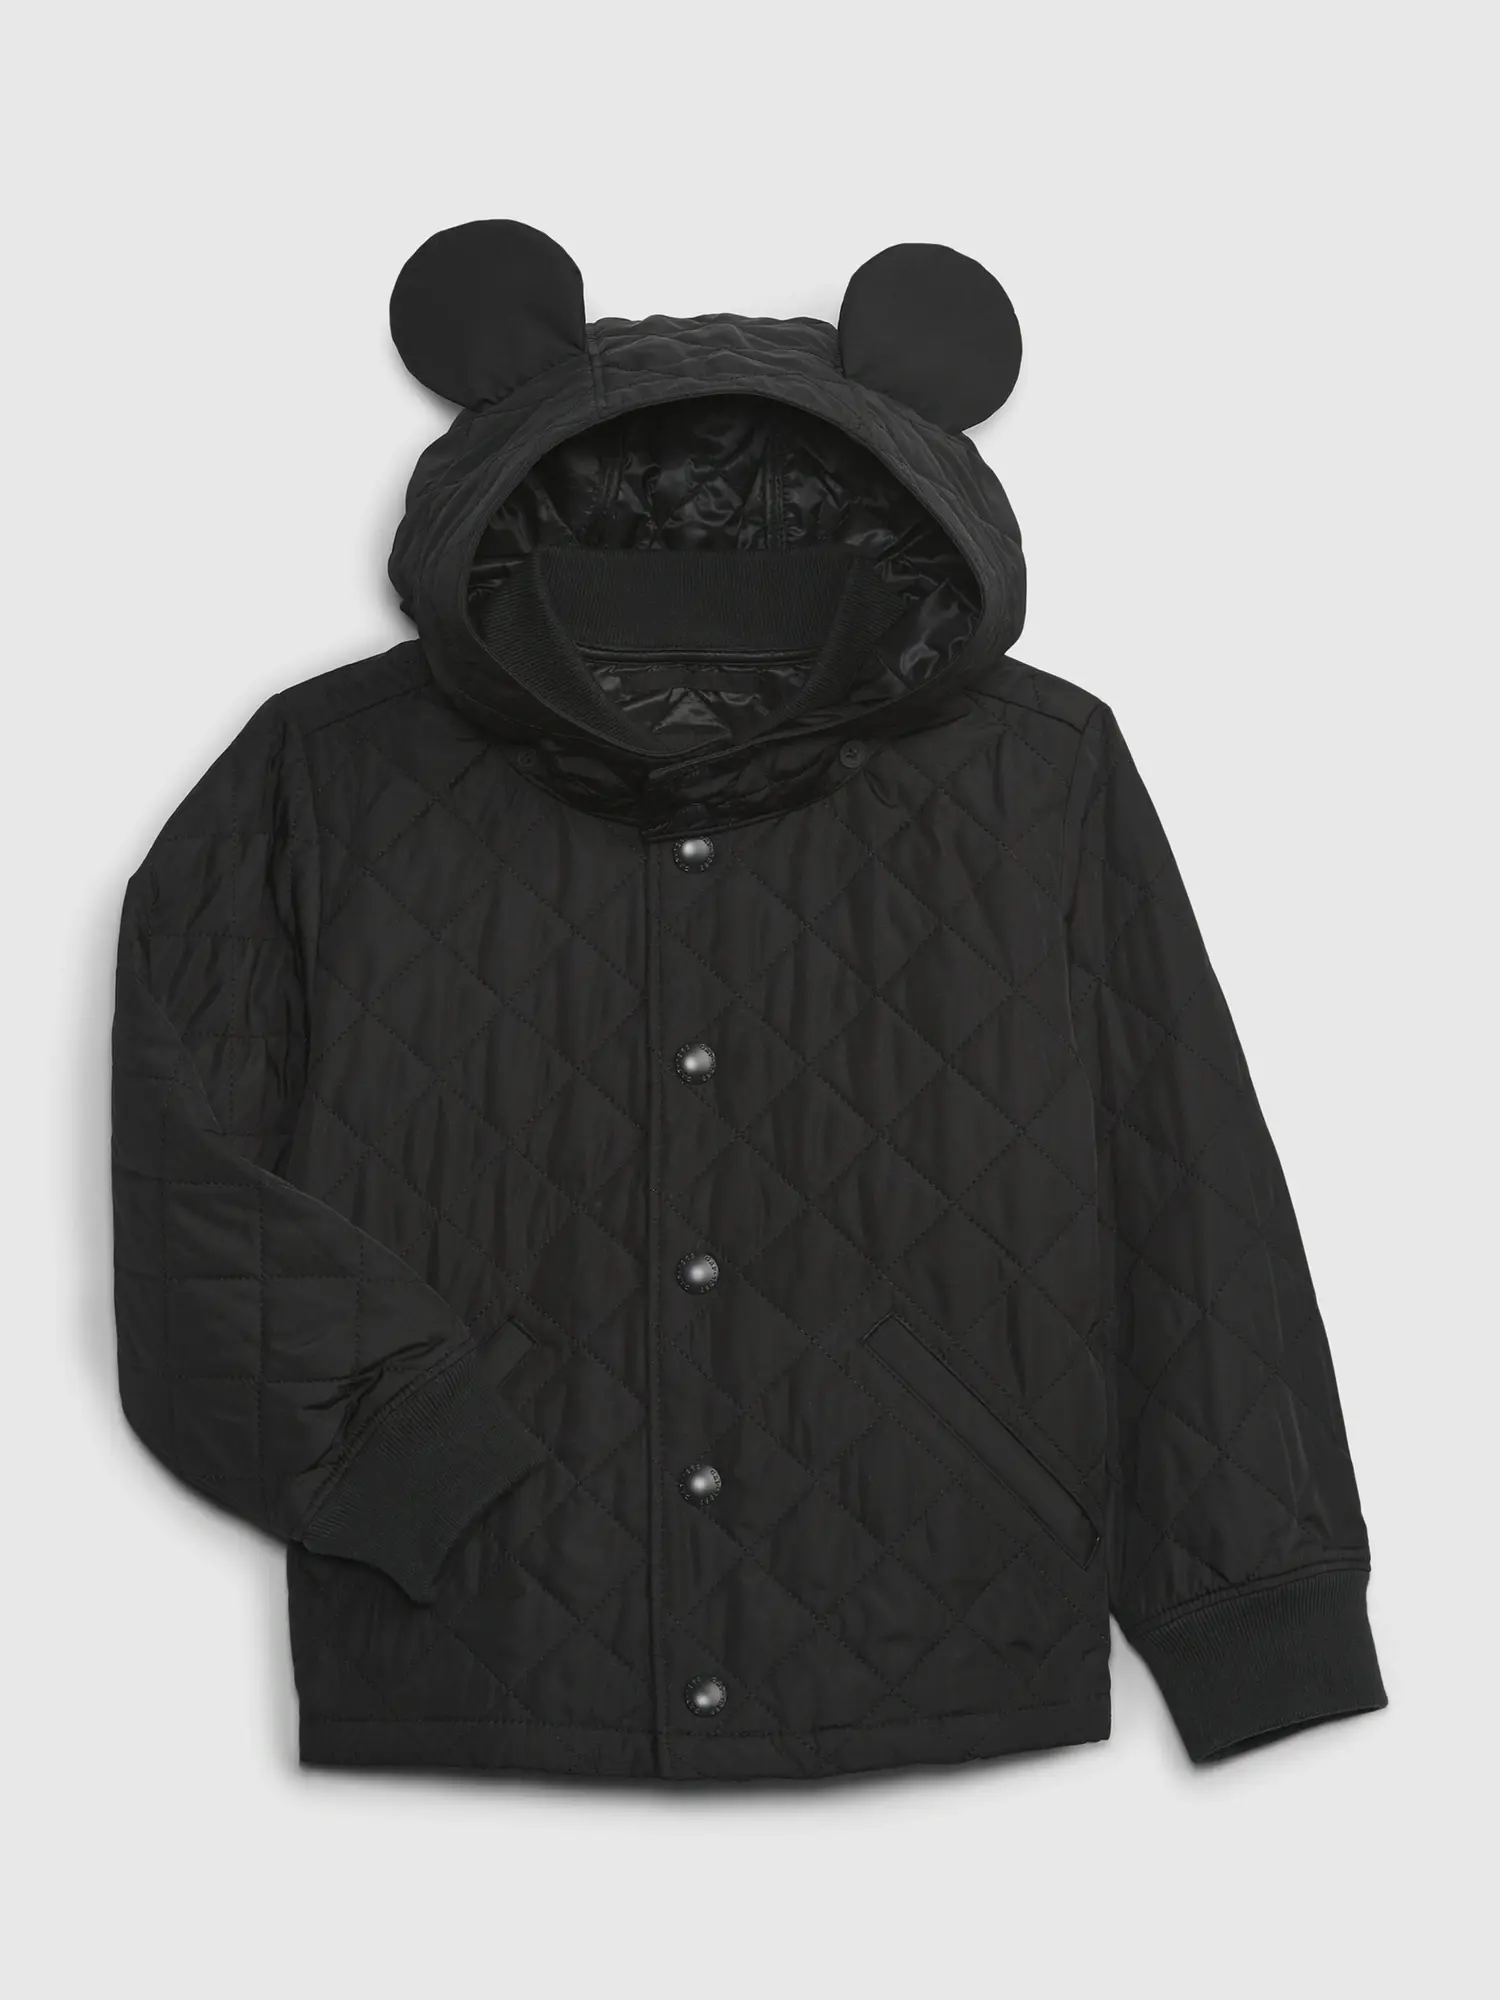 Gap babyGap &#124 Disney Recycled Quilted Bomber Jacket black. 1